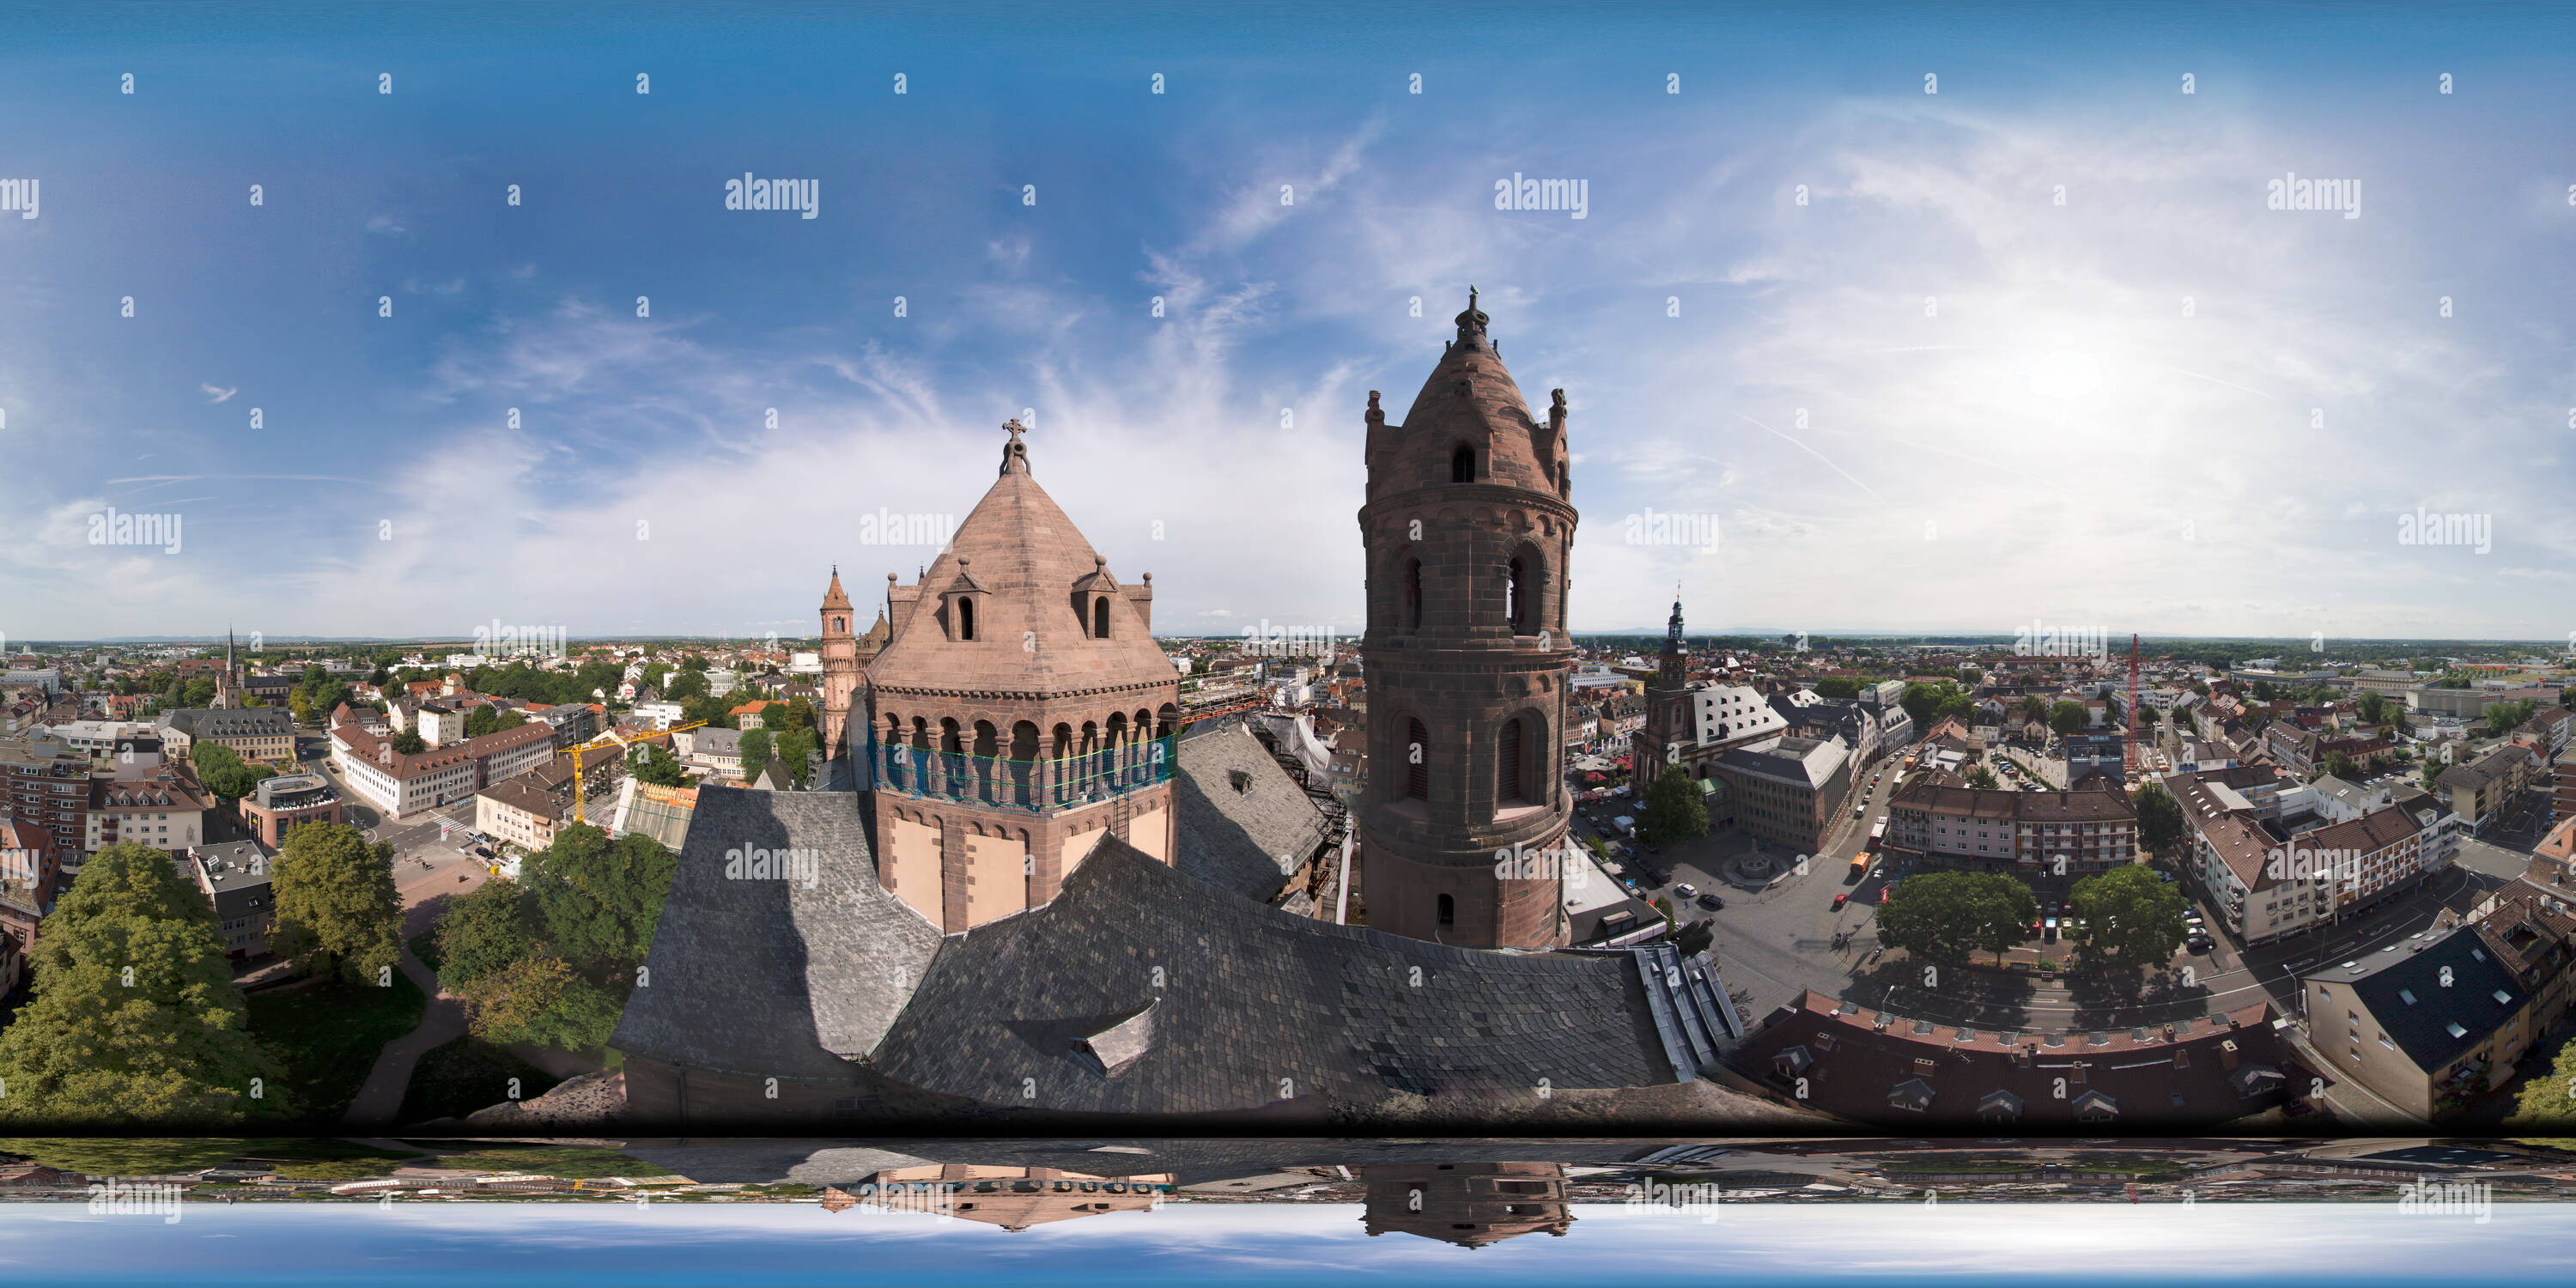 360 degree panoramic view of Panoramic View Over Worms Seen From Cathedral St Peter South East Tower, 2017-08